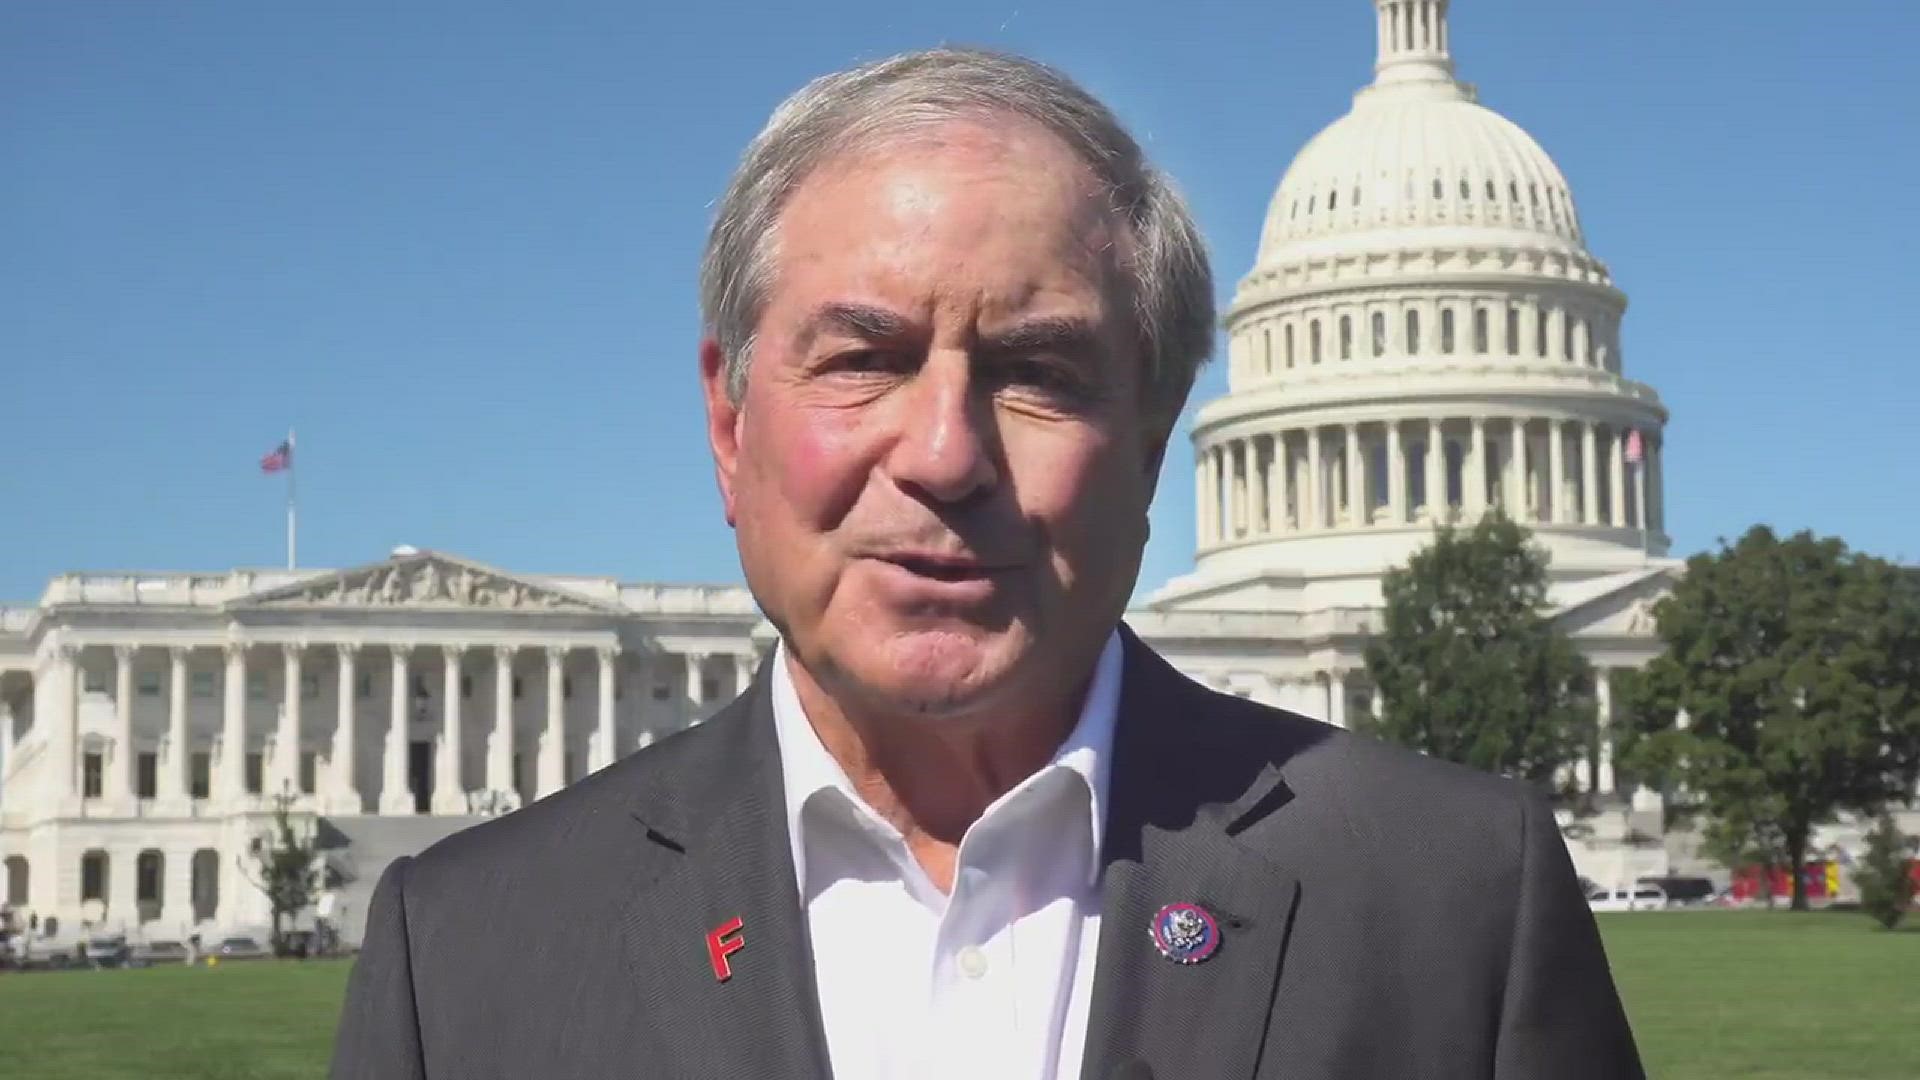 It's been an incredible journey since my first campaign in 2006 until now," Yarmuth tweeted.